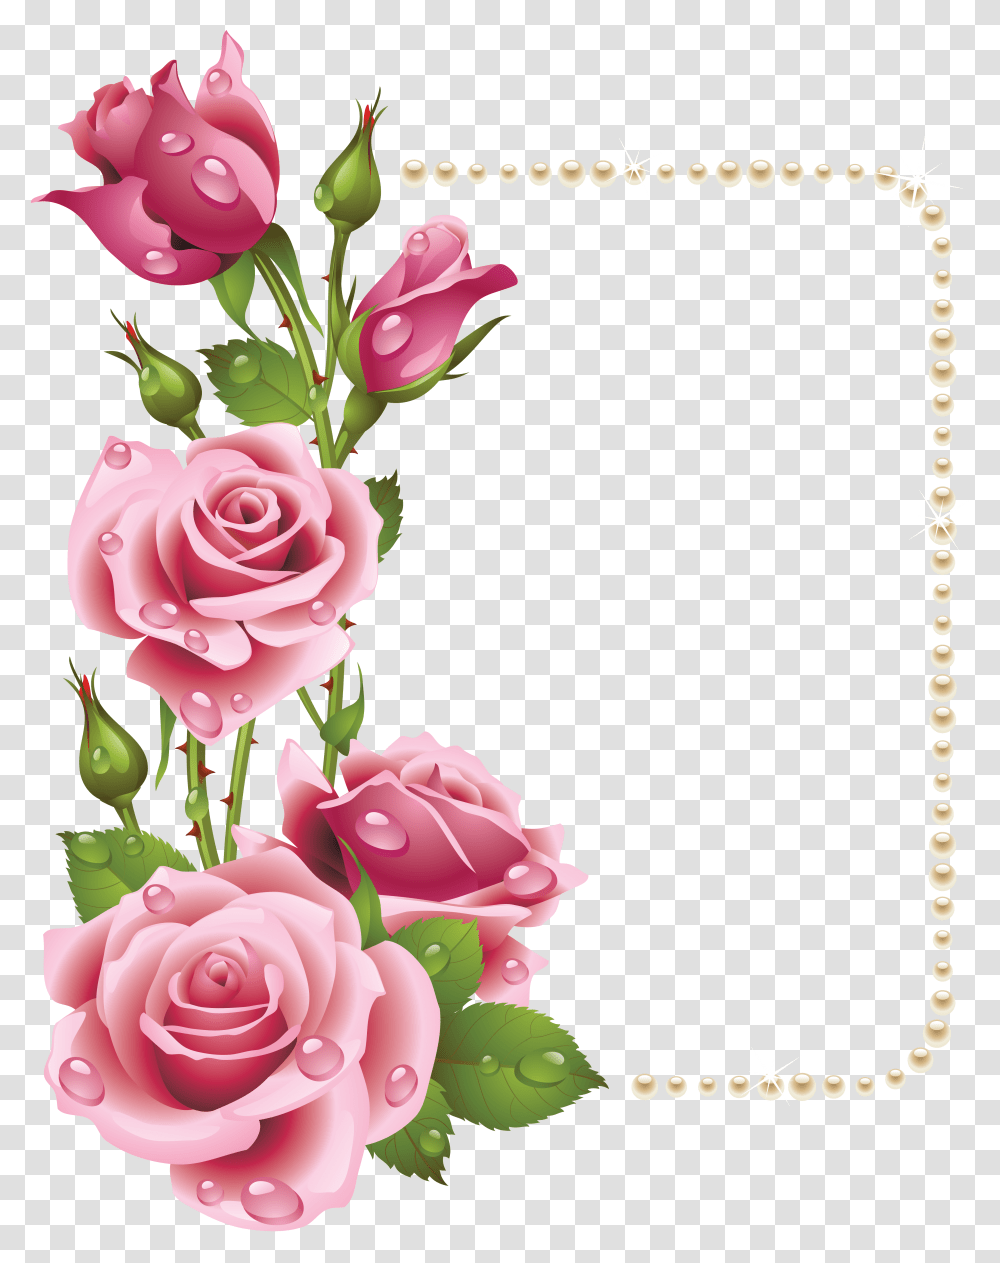 Large Frame With Pink Roses And Pearls Frams, Plant, Flower, Blossom Transparent Png